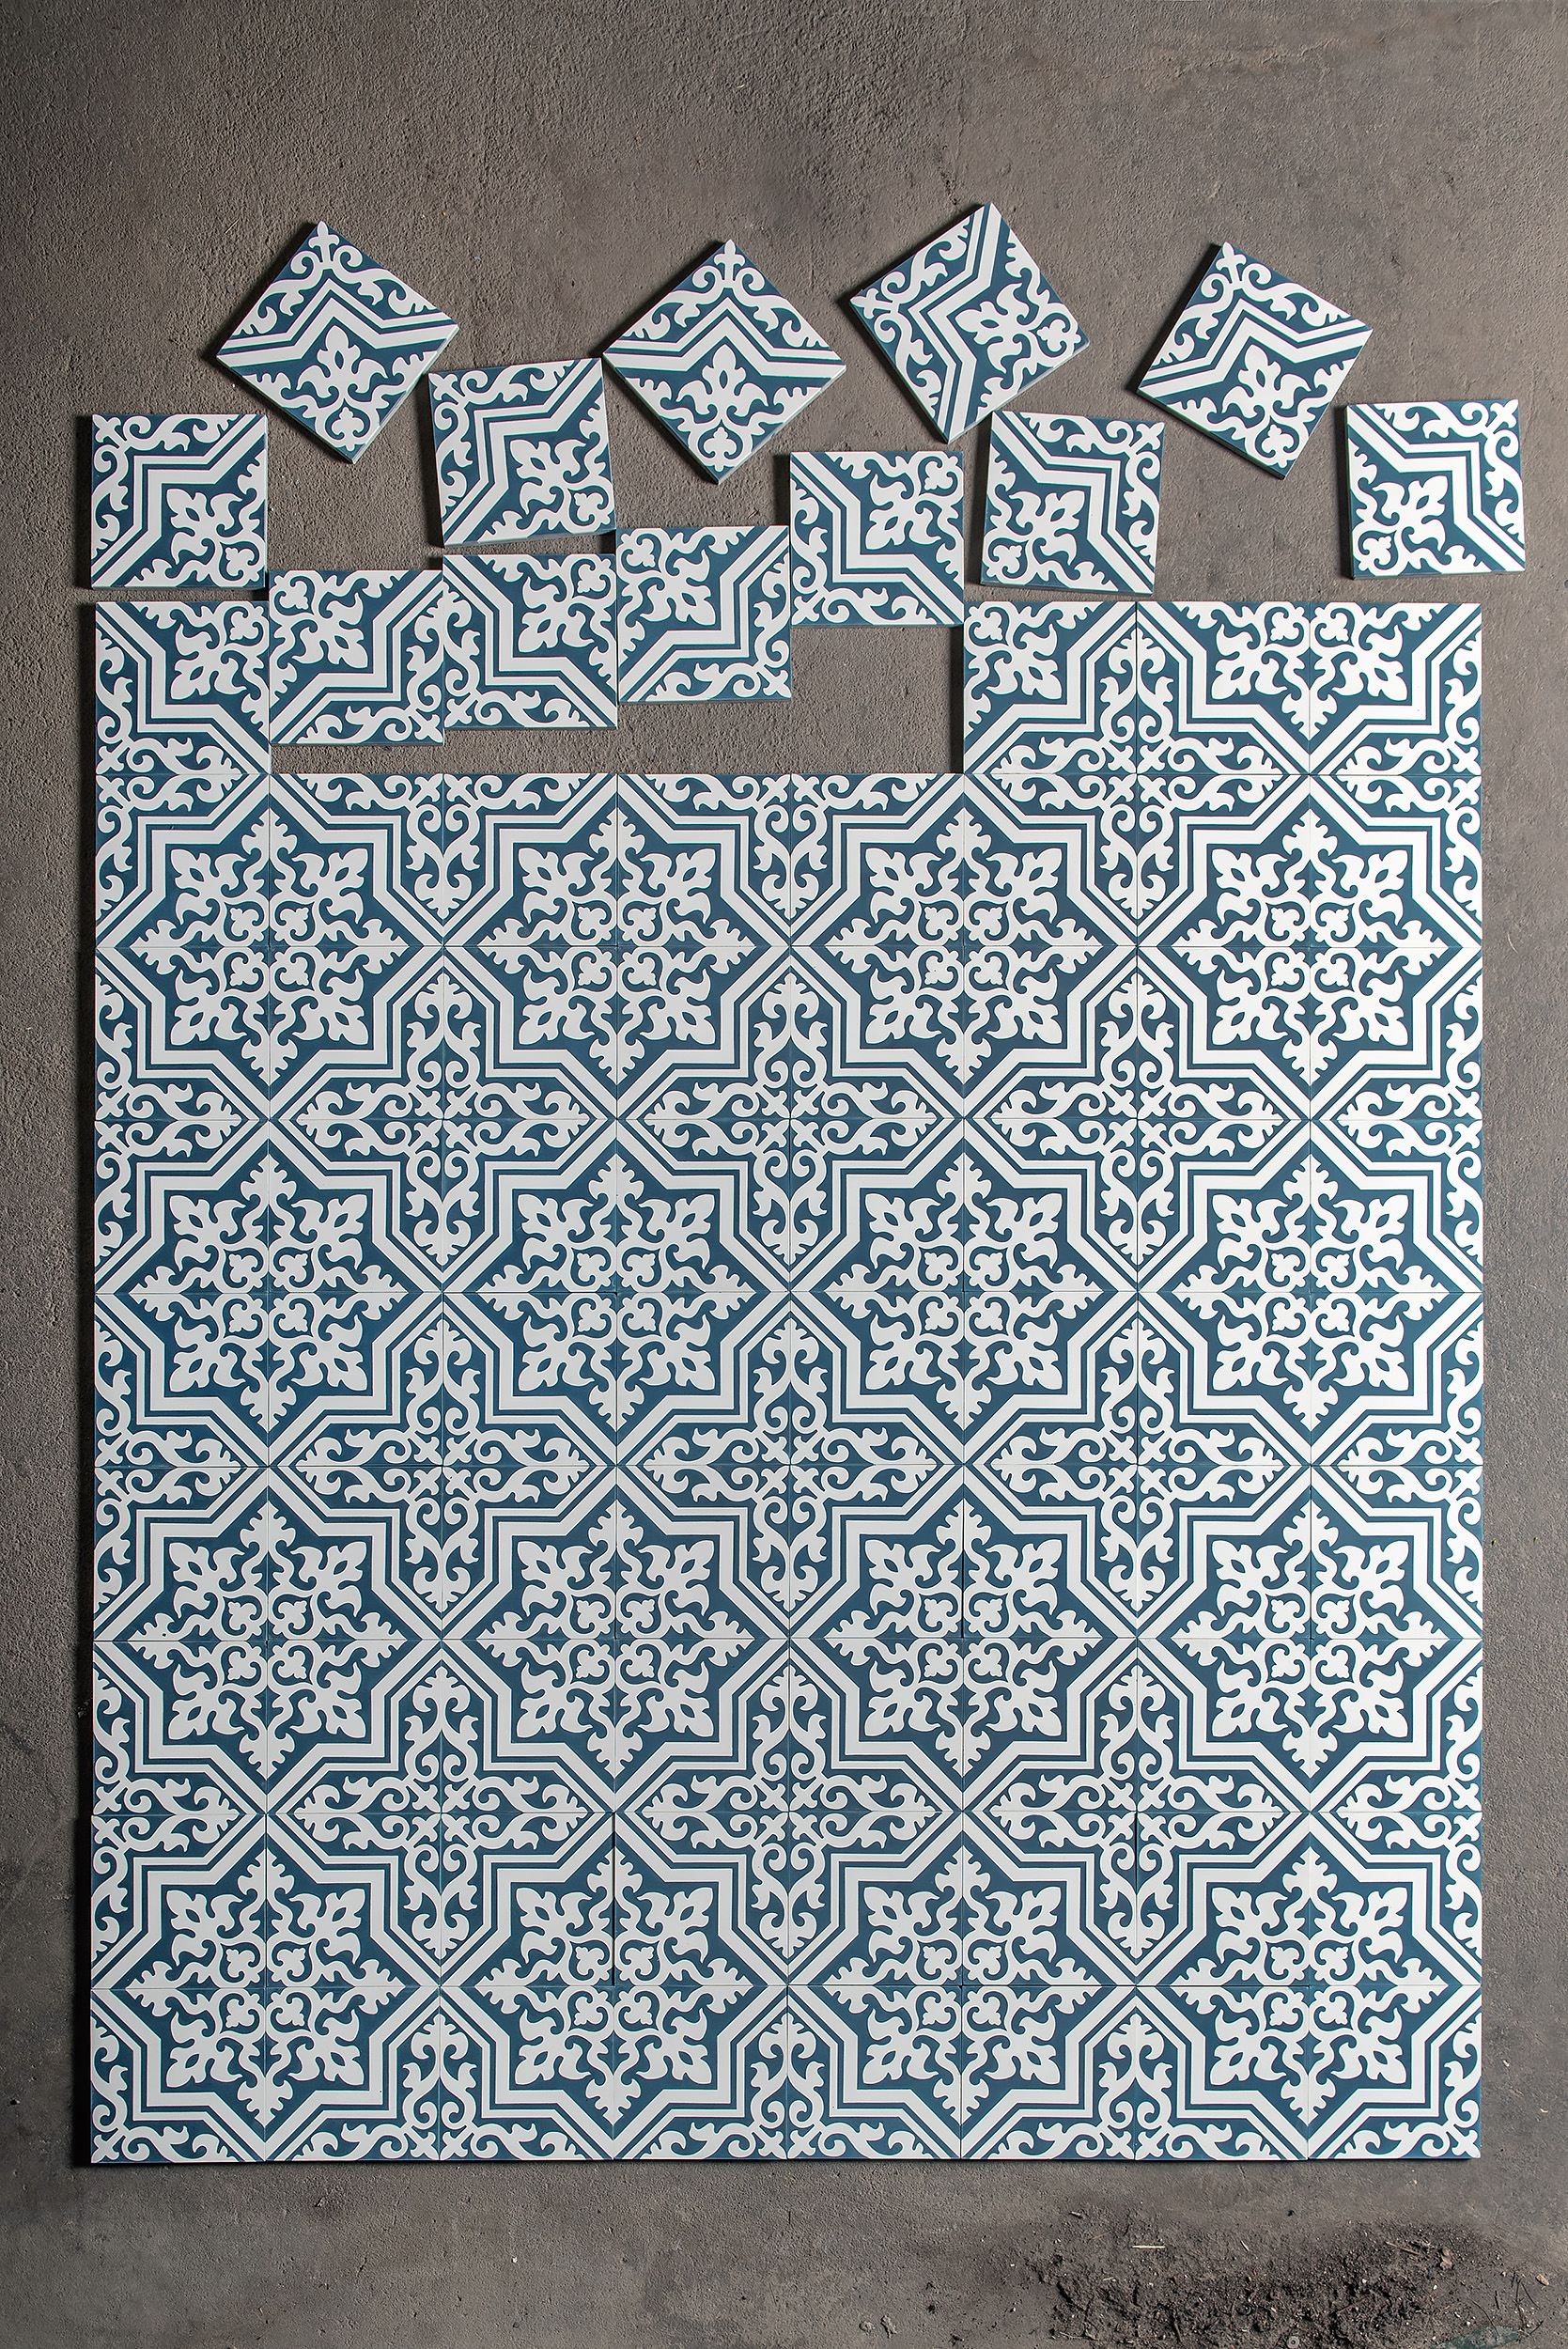 Old Gothenburg a tile with a history by Marrakech Design (1)